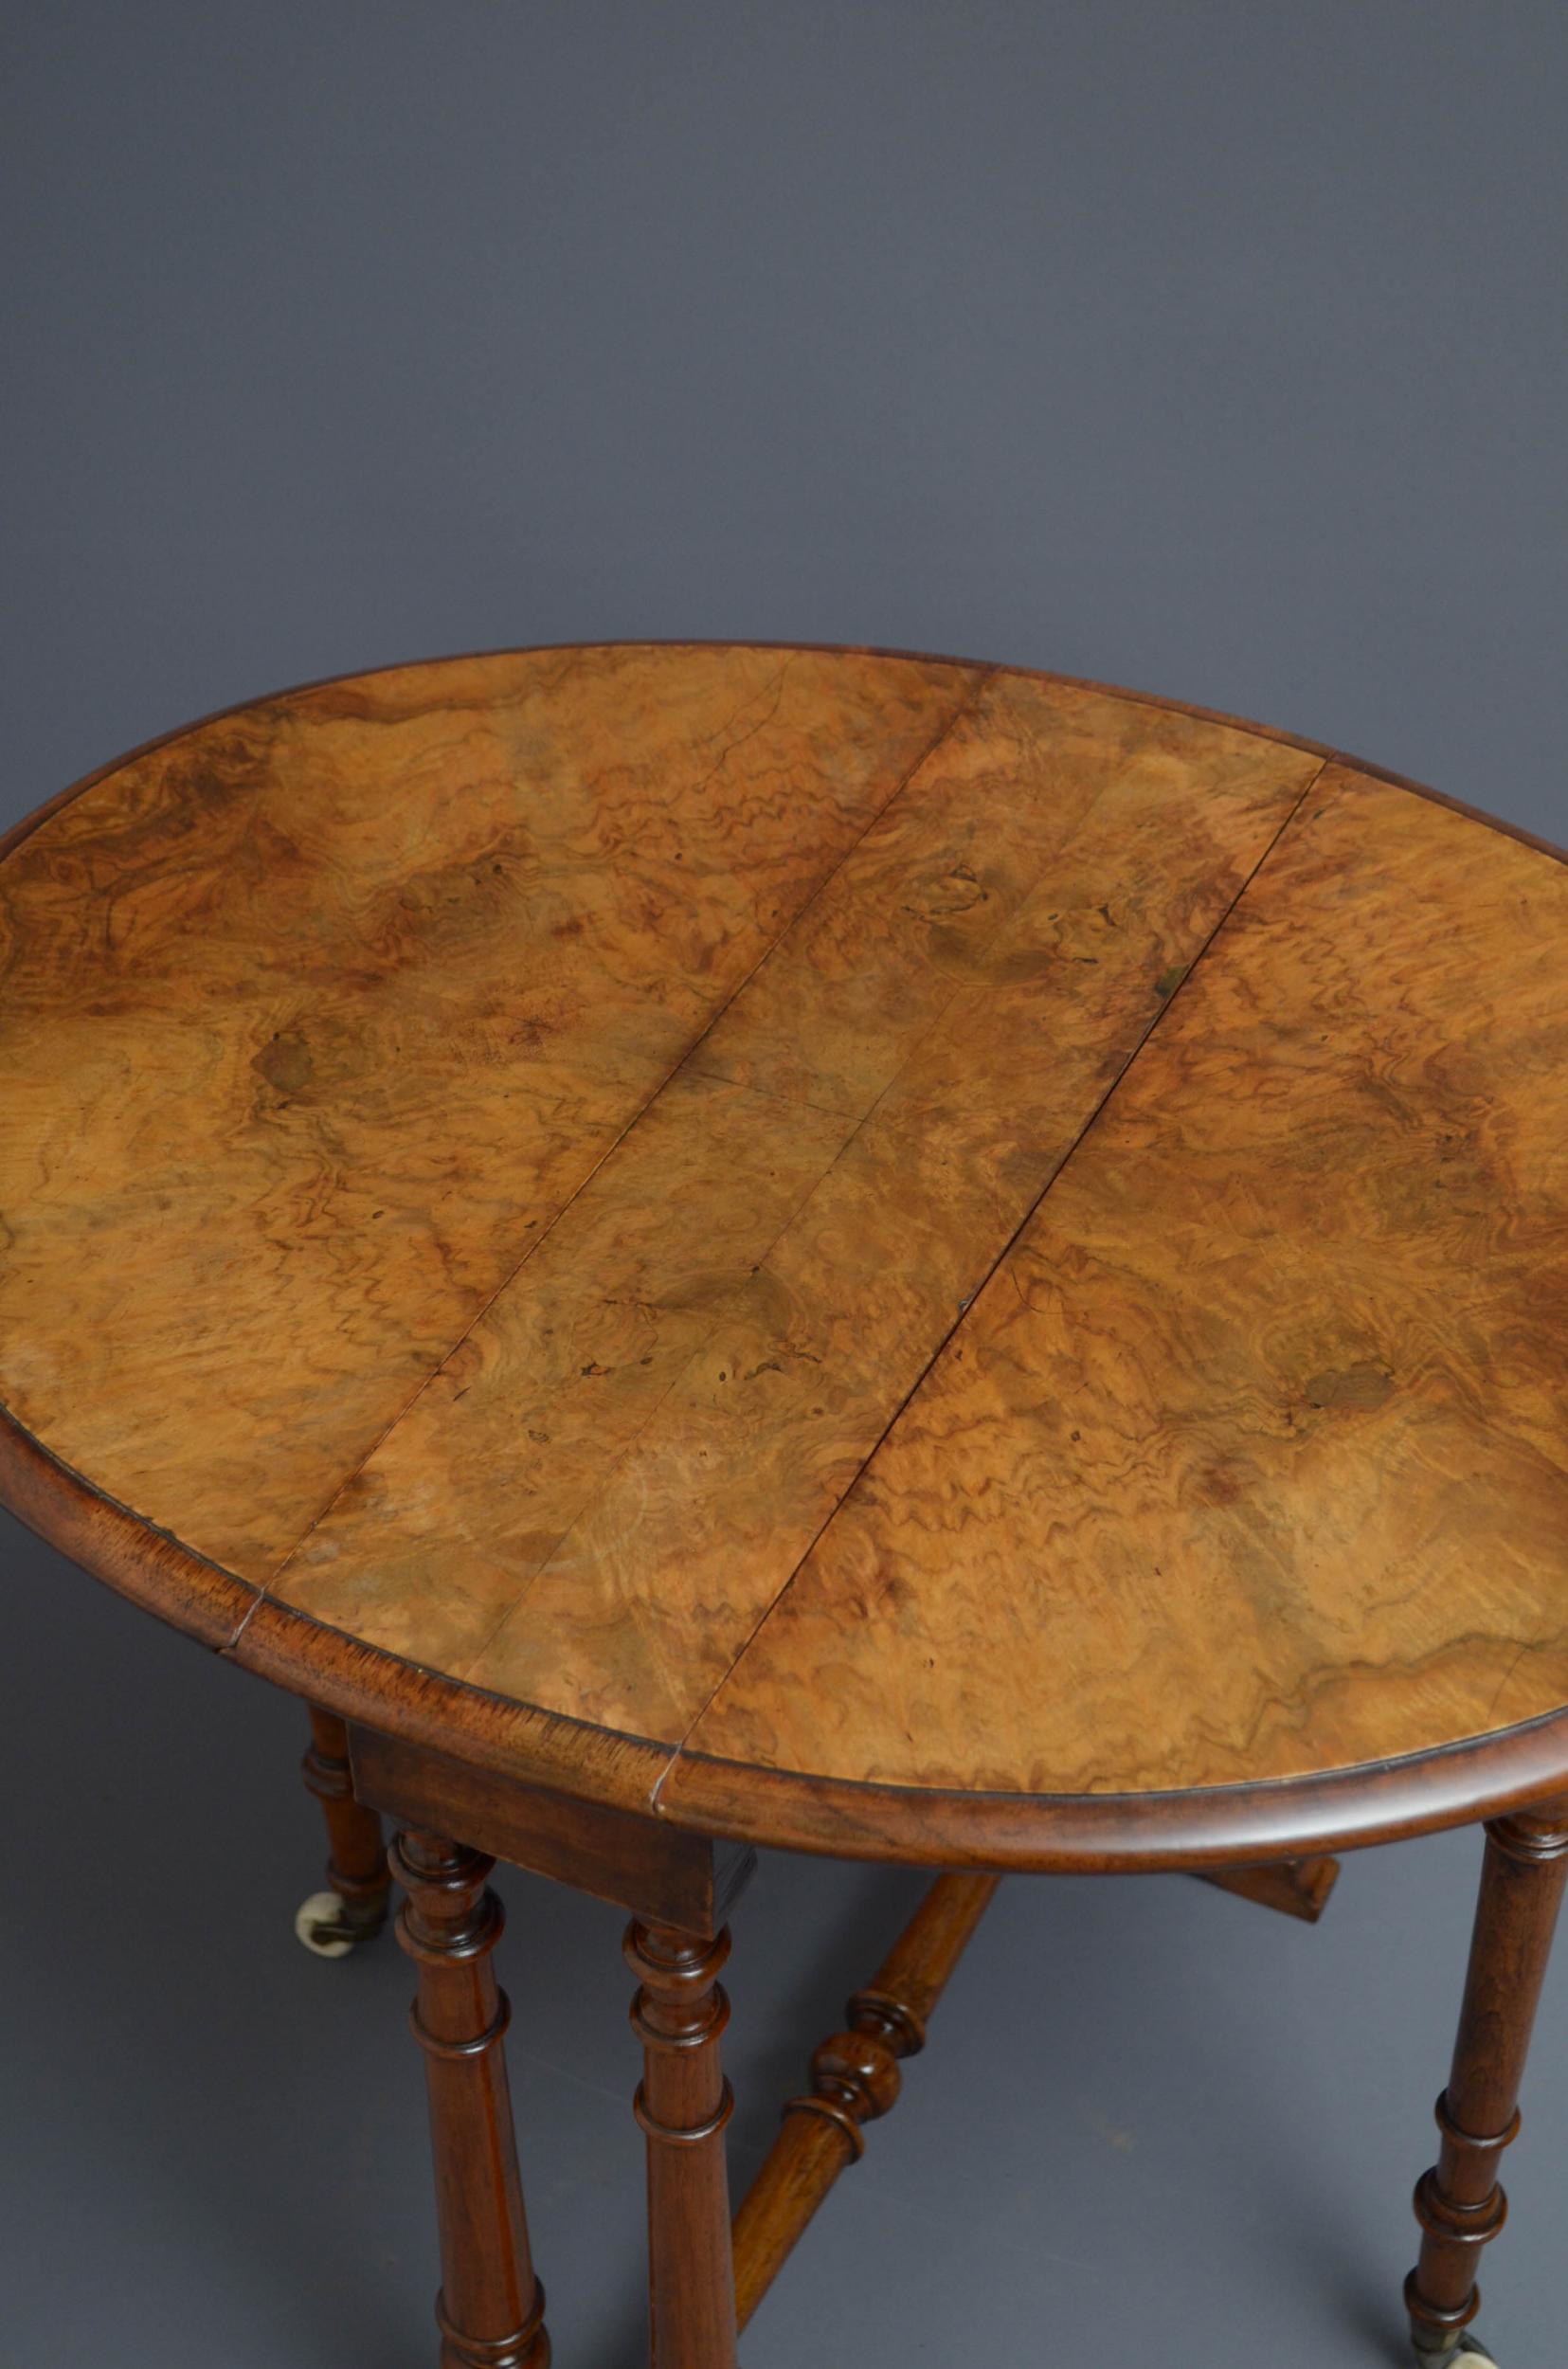 Sn5006 small Victorian, burr walnut Sutherland table of oval design, having figured walnut drop leaf top with moulded edge, standing turned supports terminating in outswept feet, all united by turned stretcher. c1870

Measures: H21